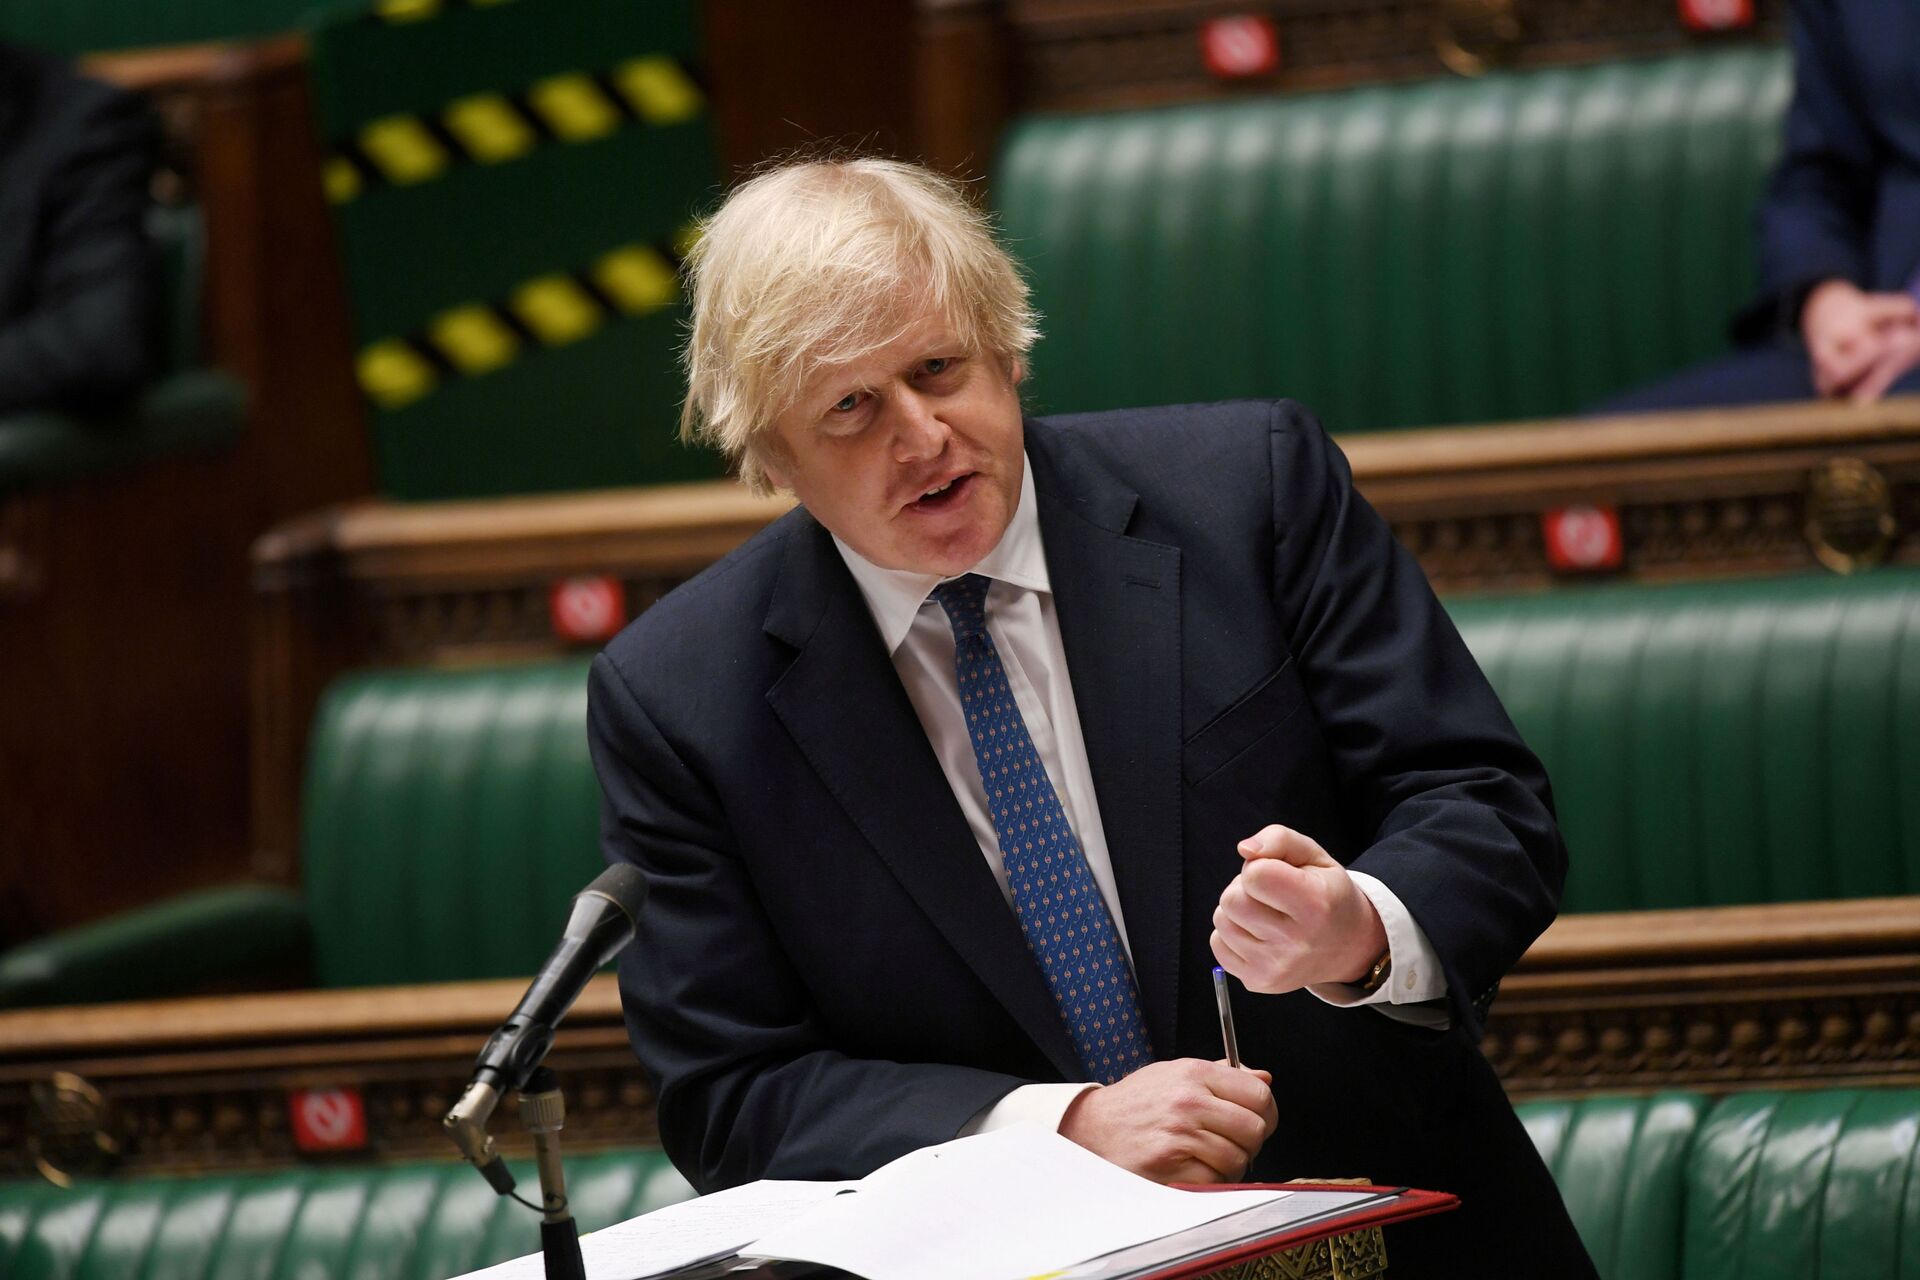 Boris Johnson Pledges to Ease UK COVID Restrictions ‘Once and for All’ - Sputnik International, 1920, 23.03.2021